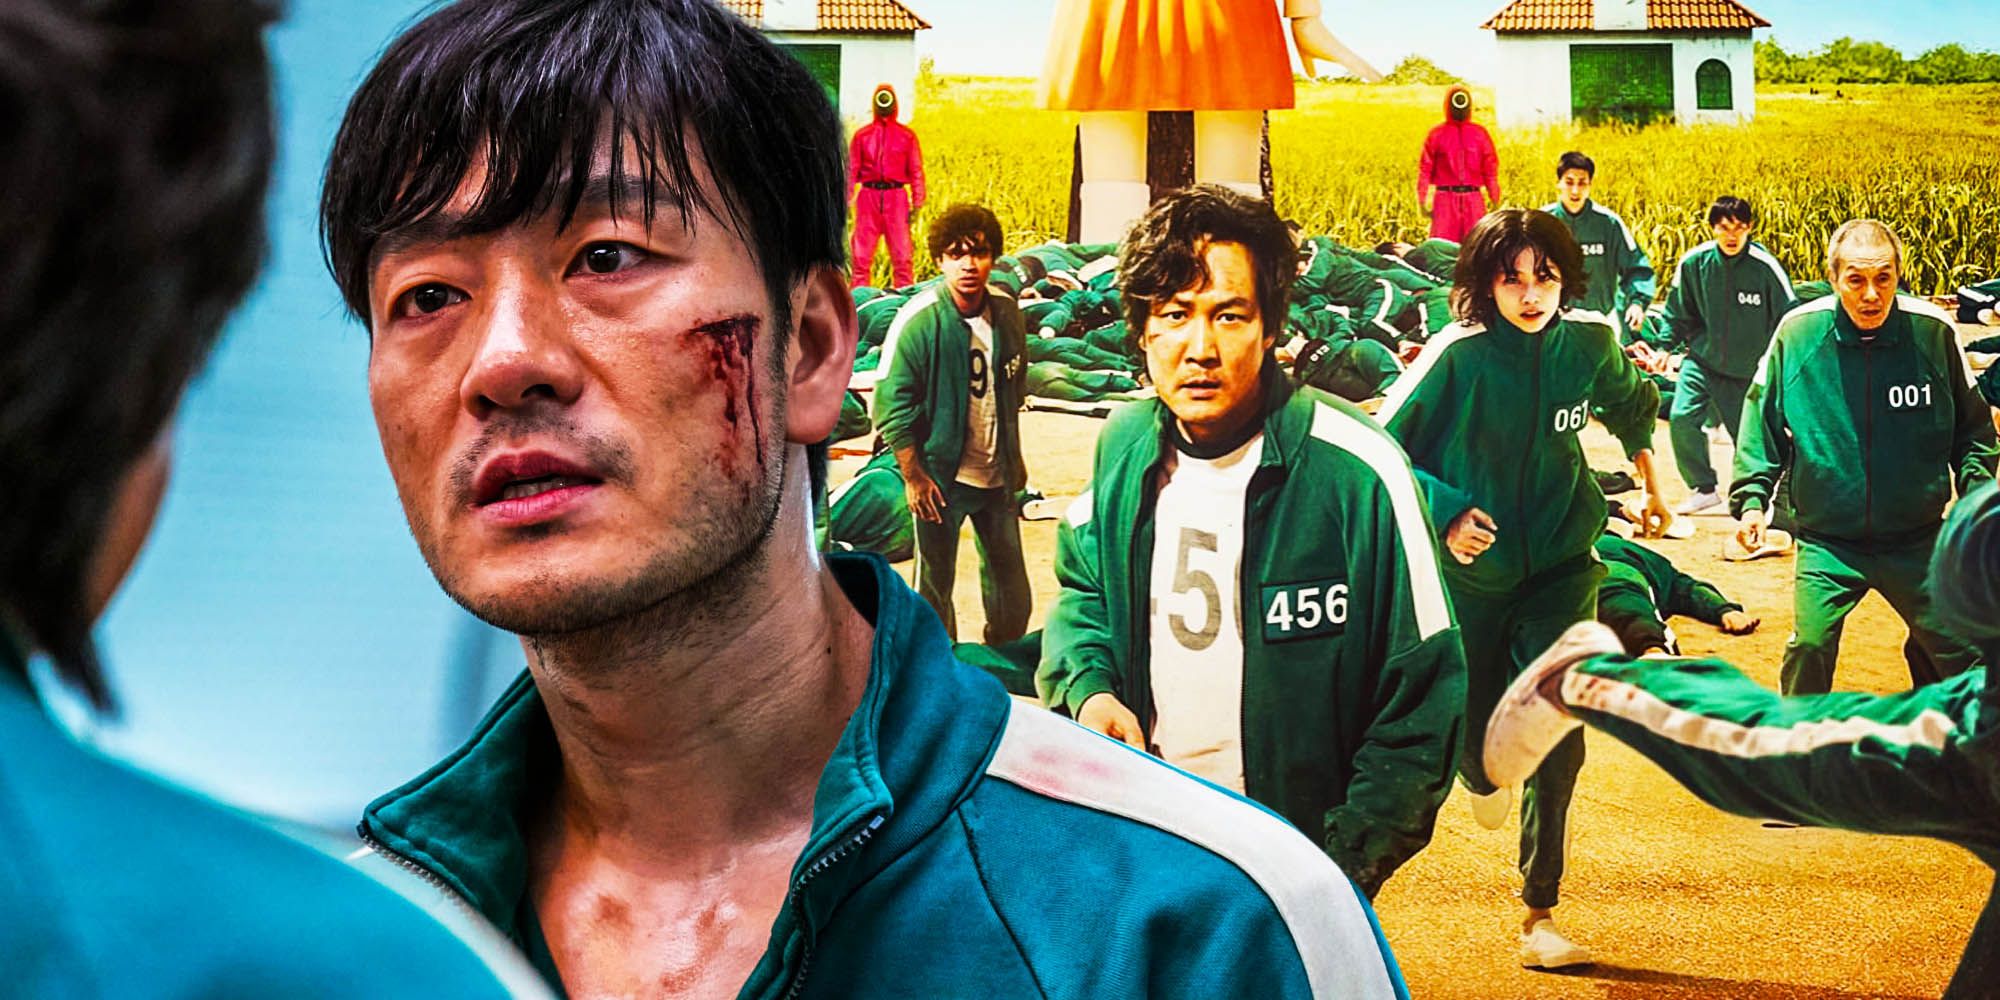 Squid Game Player 001 actor, O Yeong-su, reveals how Netflix